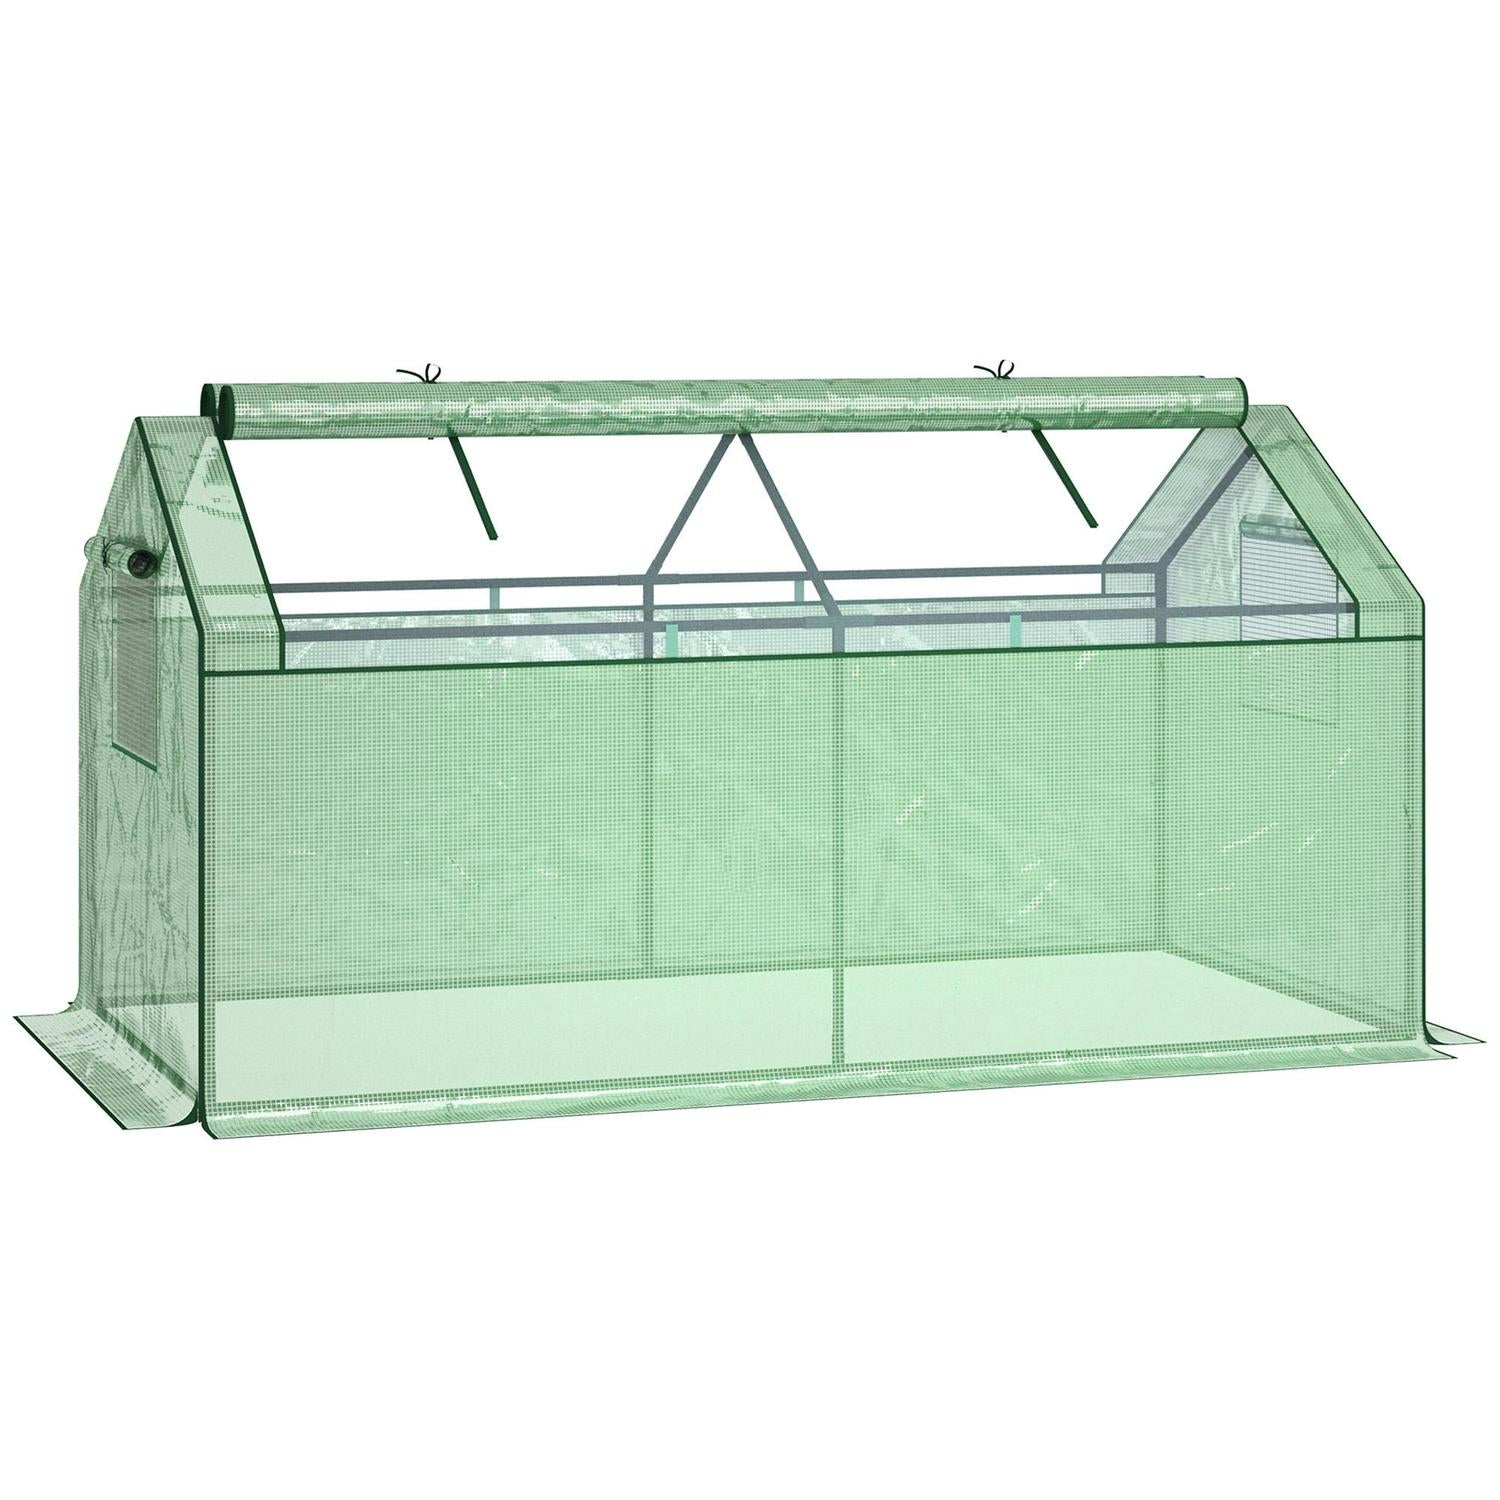 Mini Greenhouse Portable Garden Growhouse For Plants With Large Zipper Windows Outdoor, Indoor, 180 X 92 92cm, Green